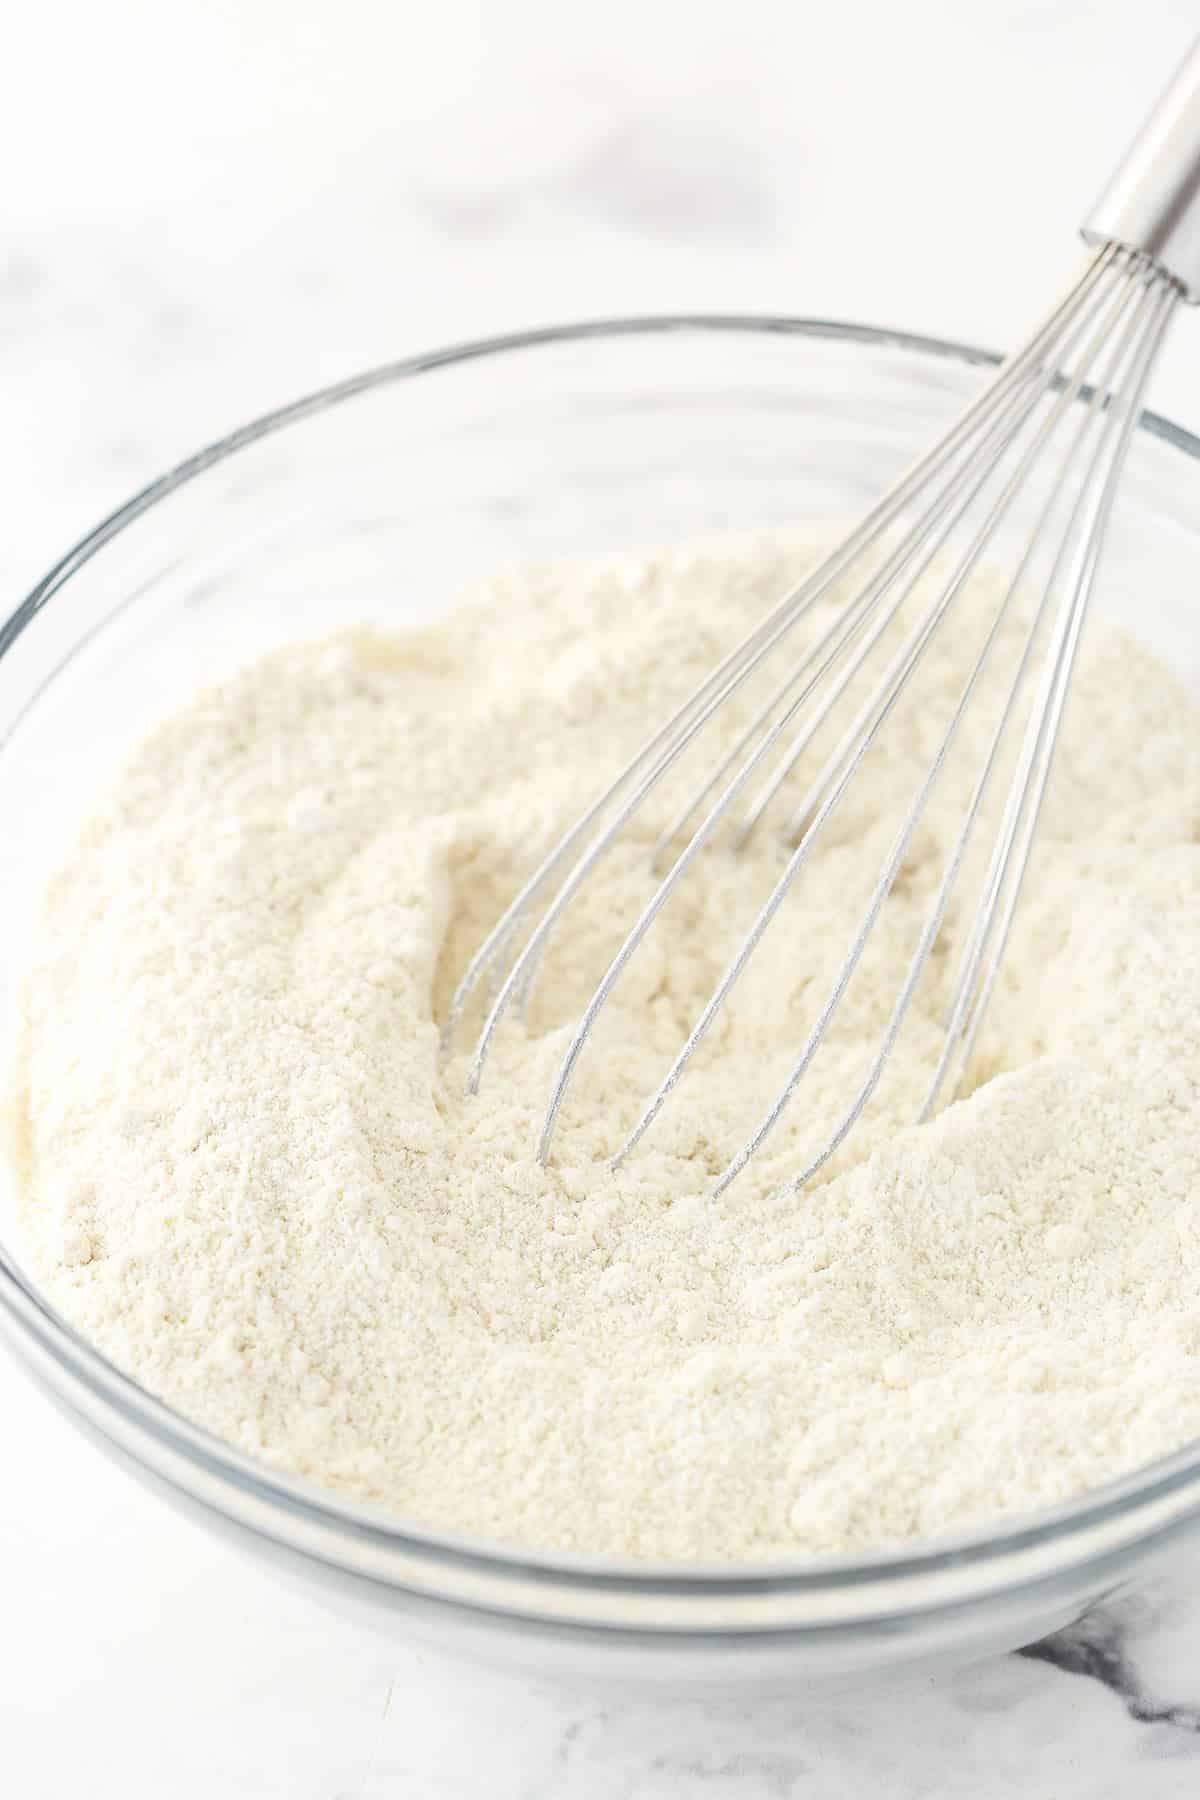 Whisking the flours and salt.